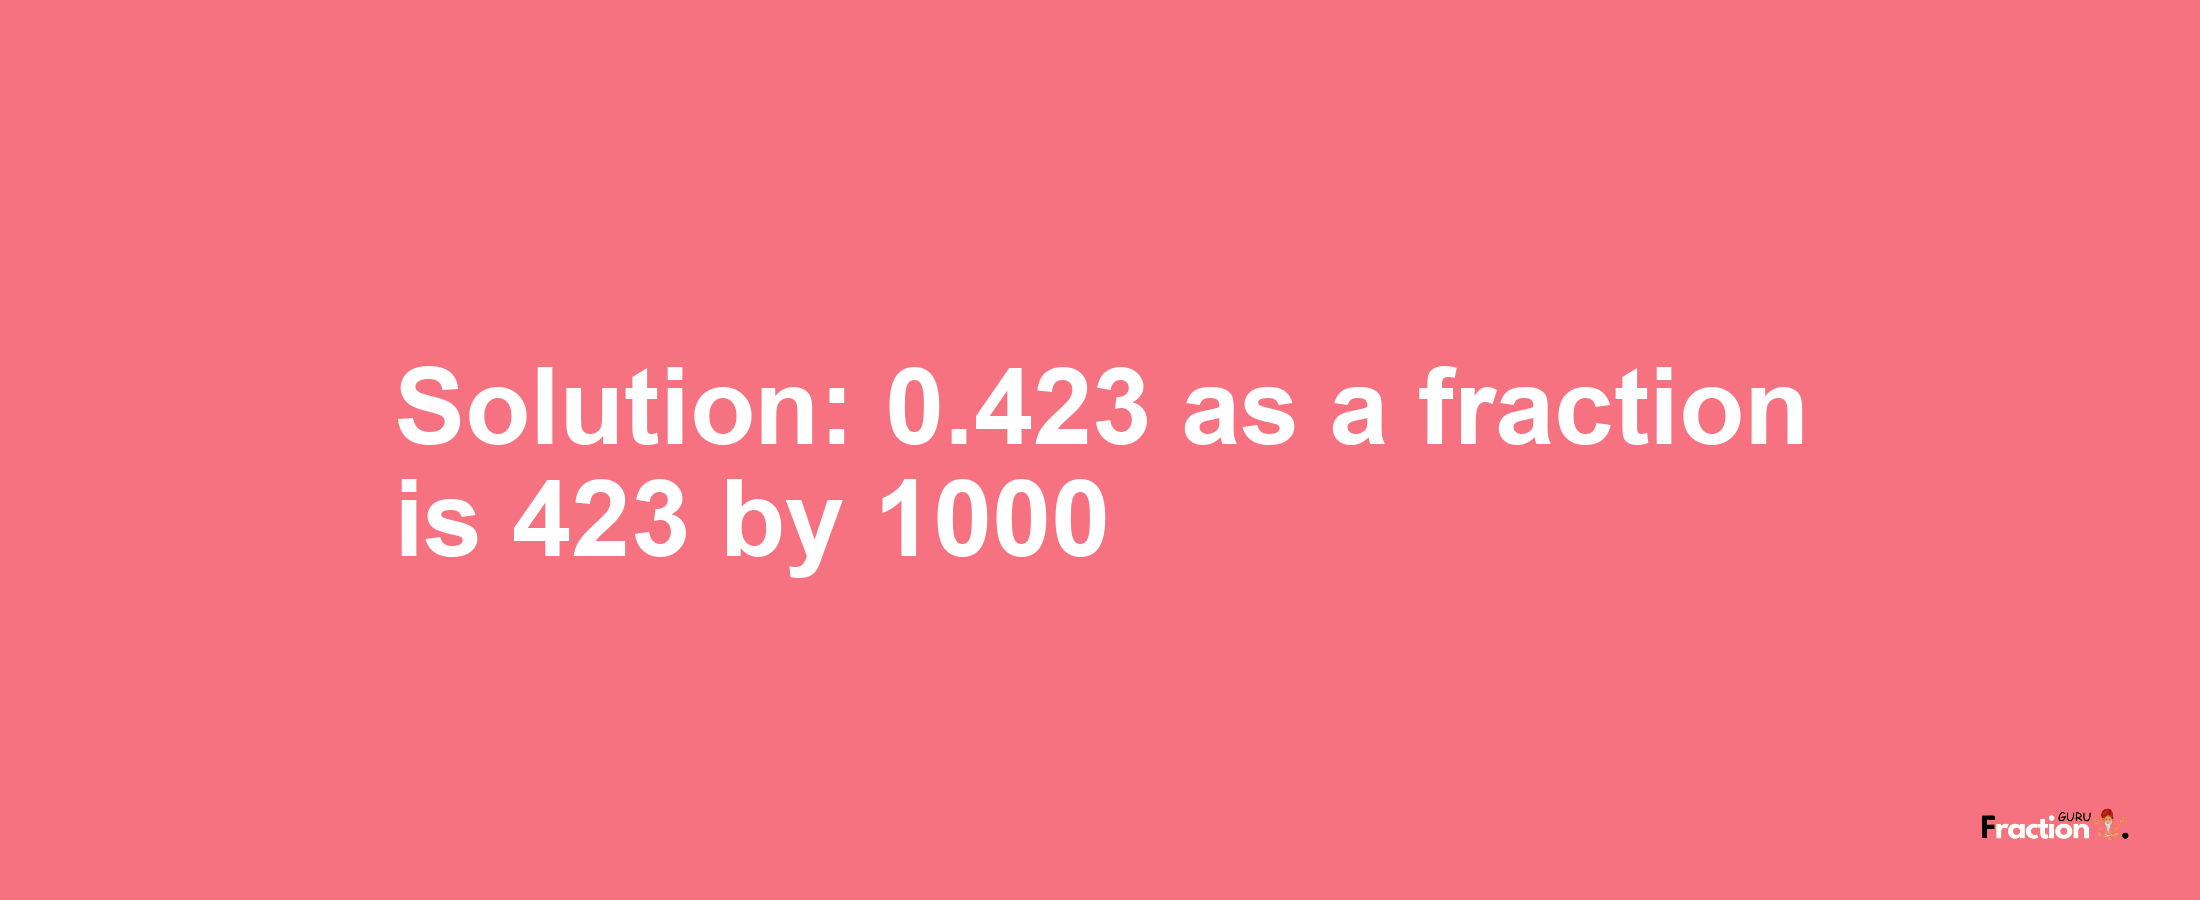 Solution:0.423 as a fraction is 423/1000